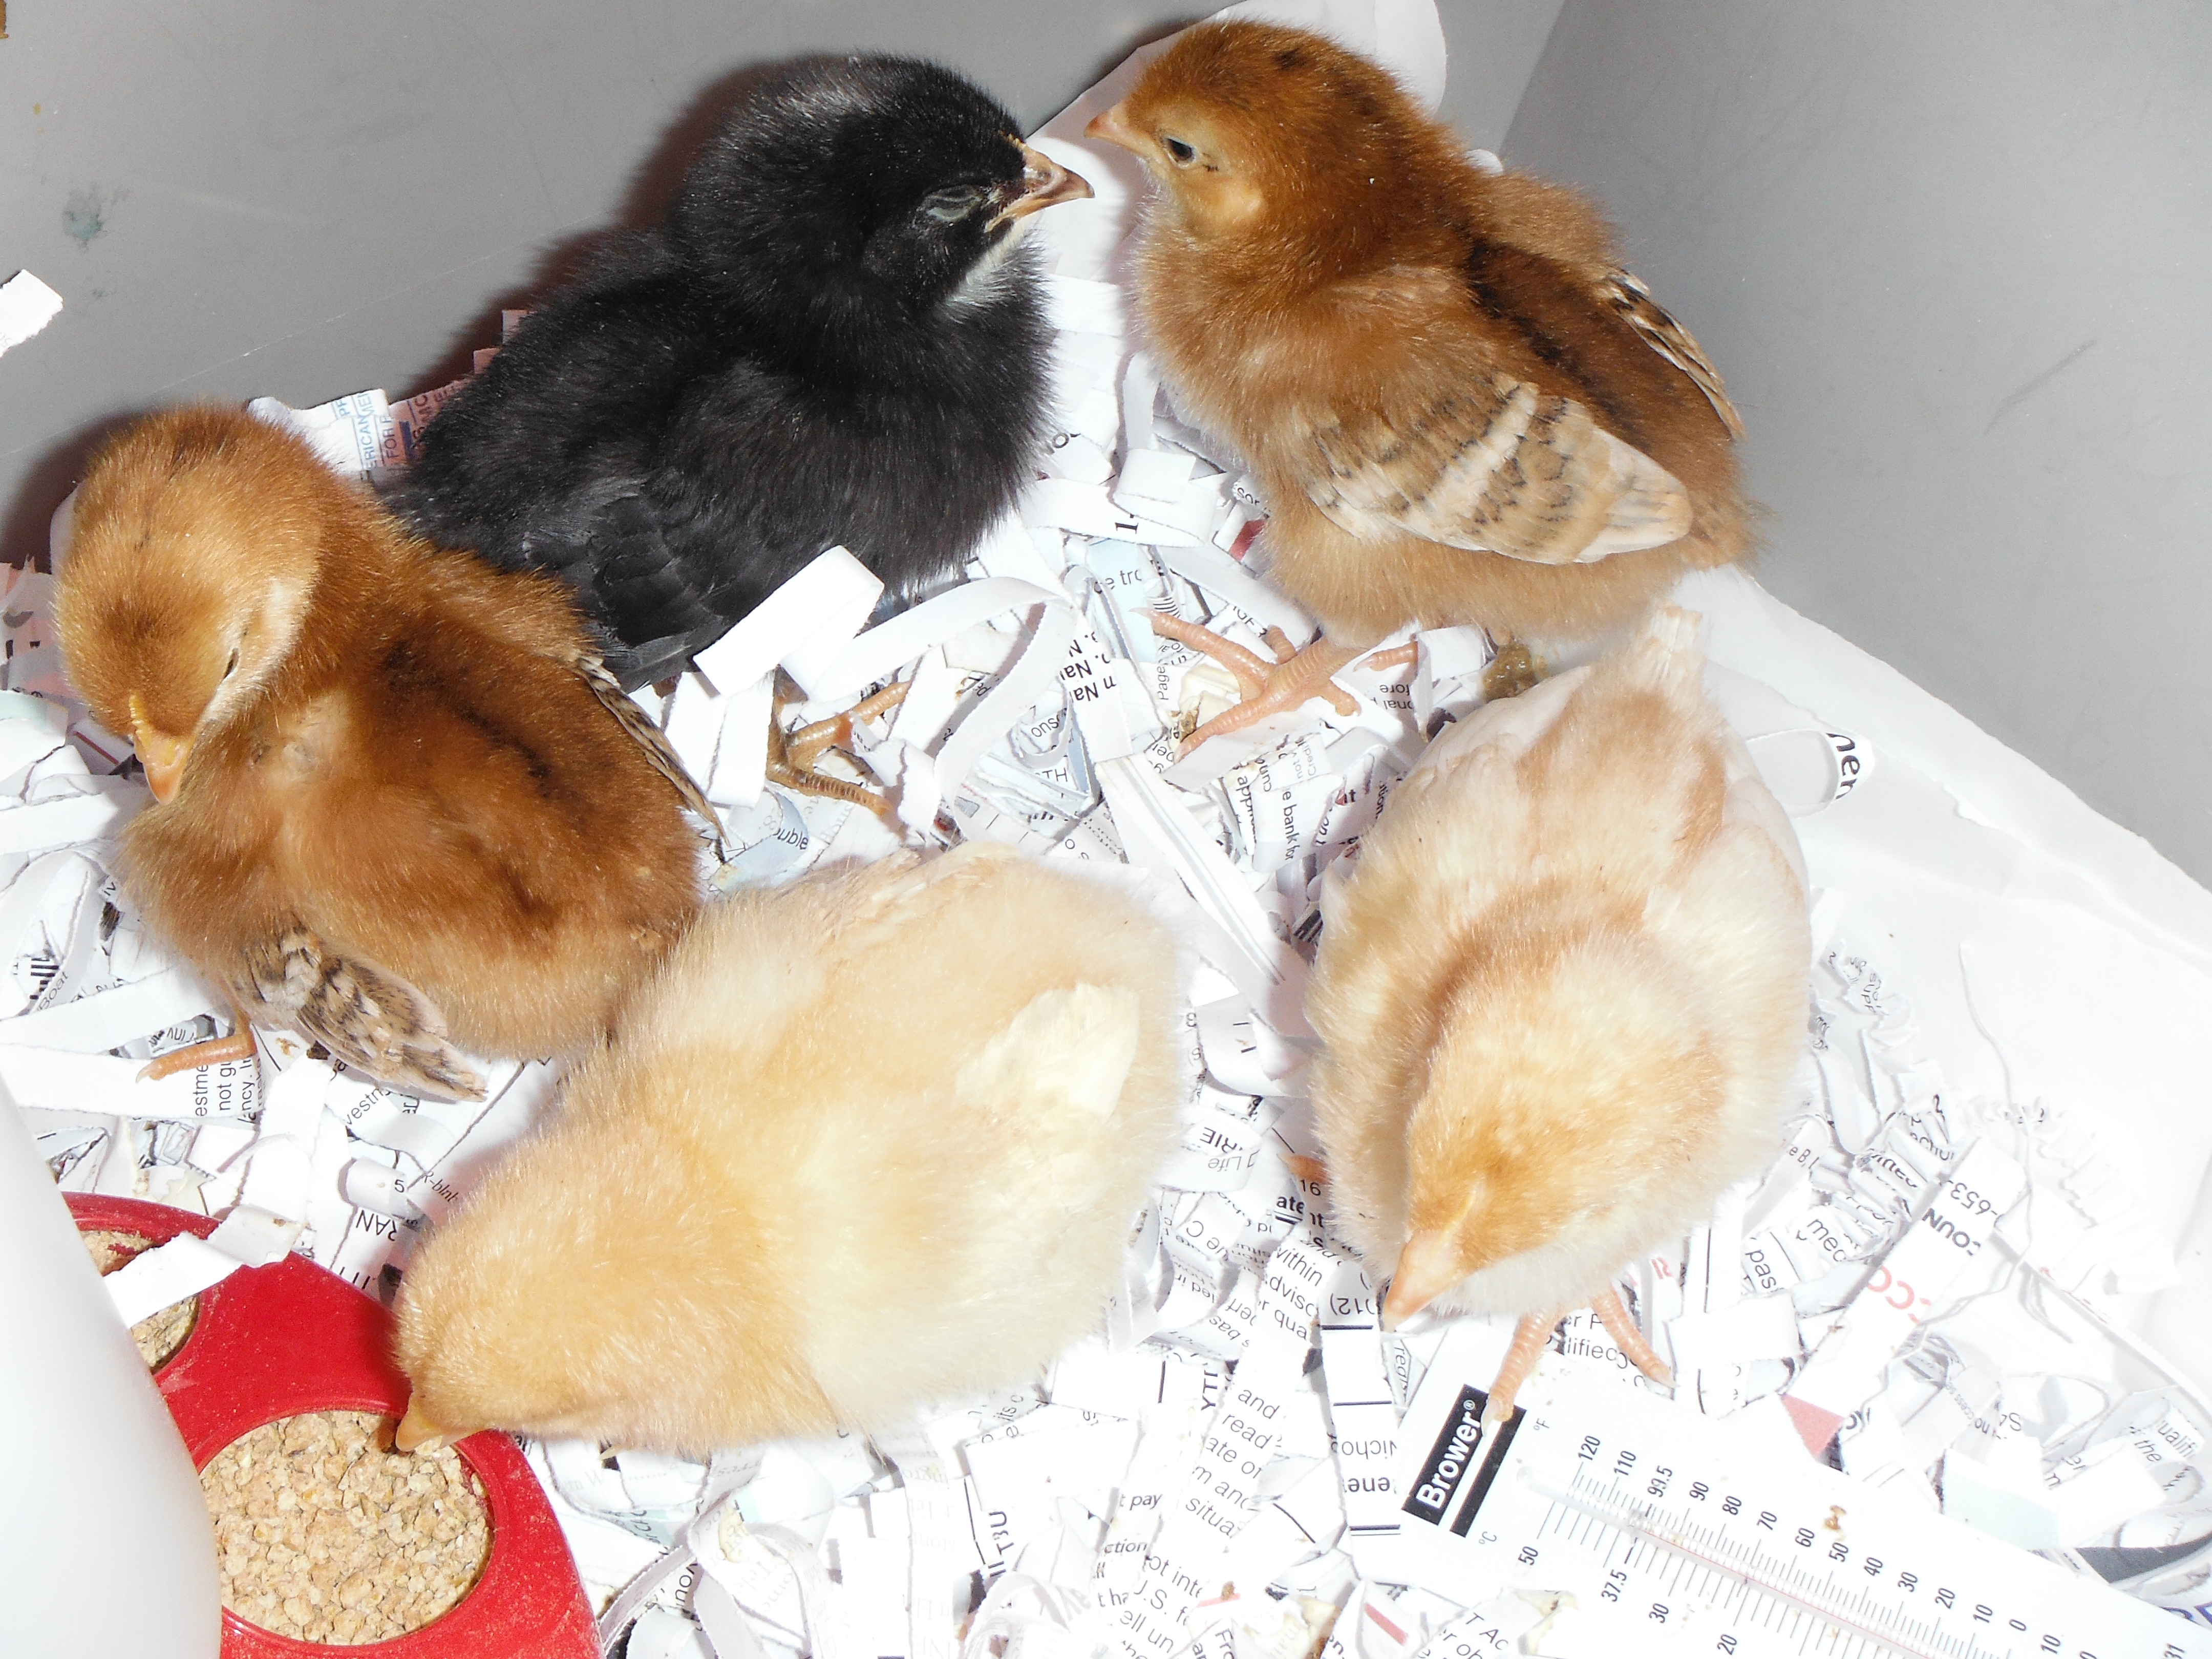 Clockwise from RIR on left: Nikki (Nick's Rhode Is Red), Lucille (Lola's Barred Rock), Rhodie (Sam's RIR), No-Name (Chet's Sexlink), Fluffy (Eli's Buff Orpington).  Hannah's not pictured, yet....TBD (Speckled Sussex?)